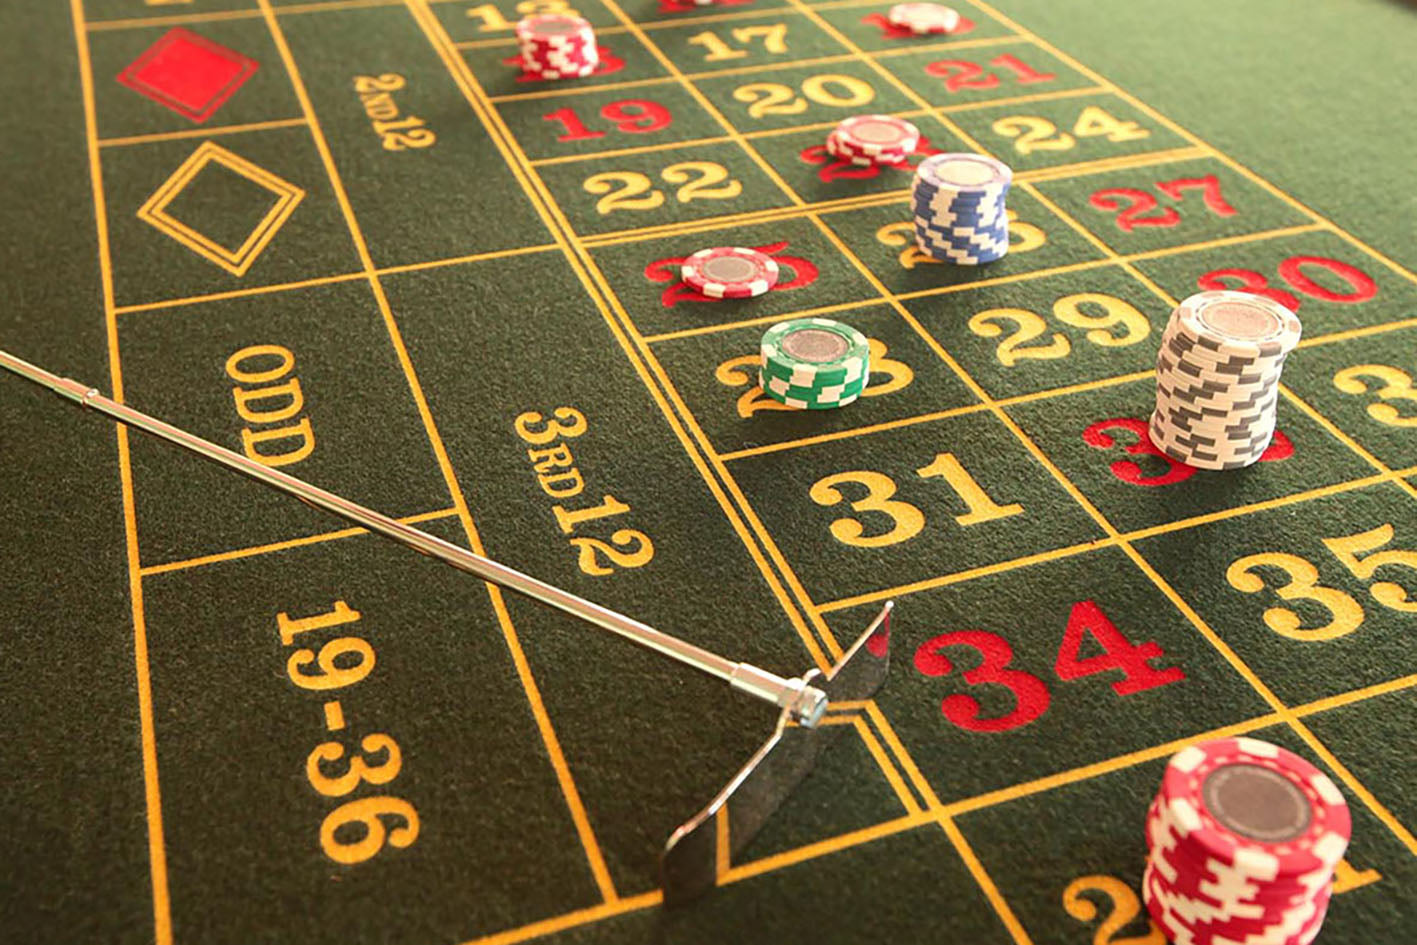 Have roulette tables been cheating us for the last hundred years?